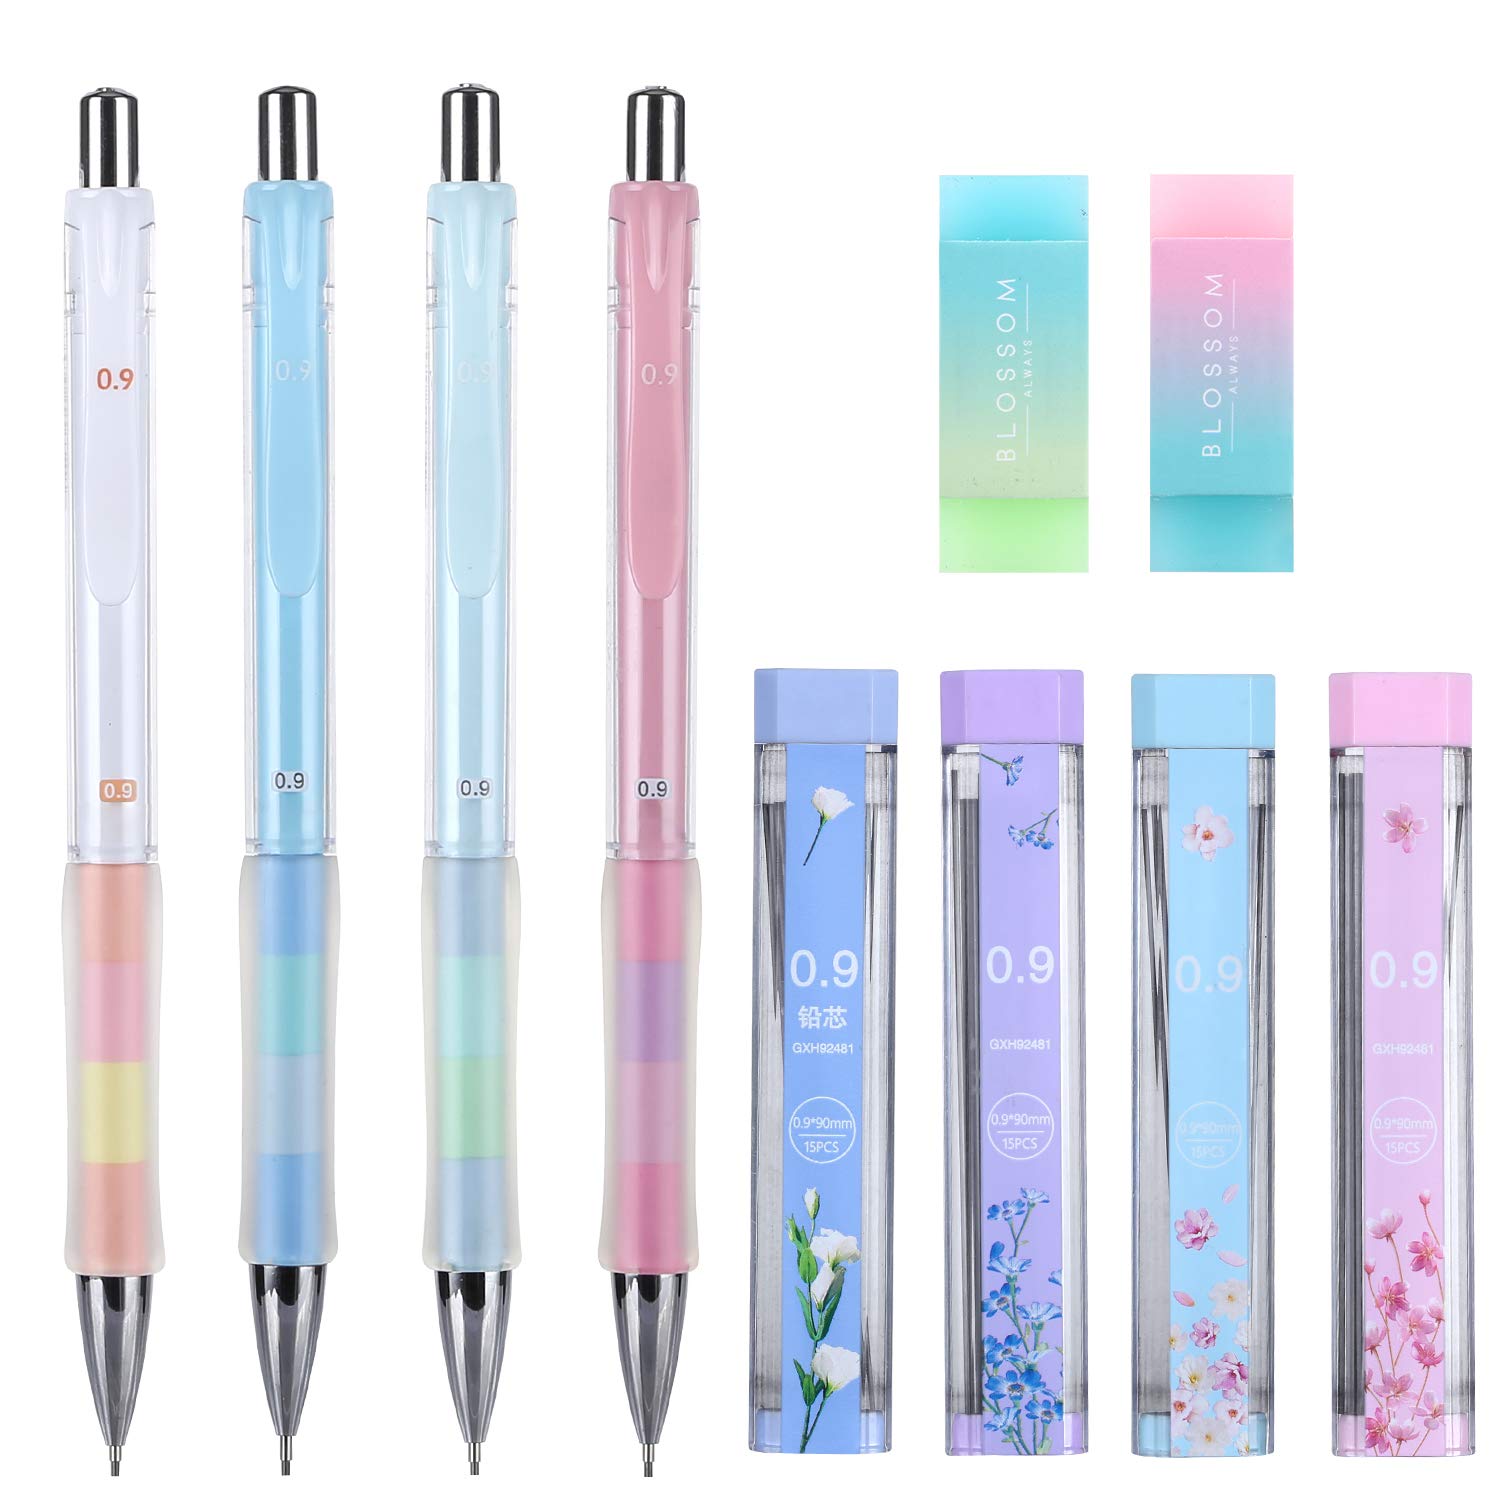 Book Cover Mechanical Pencil, ExcelFu 4 Pieces 0.9 mm Mechanical Pencils with 4 Tubes 2B Lead Refills and 2 Pieces Erasers for Writing, Drawing, Signature, 4 Colors